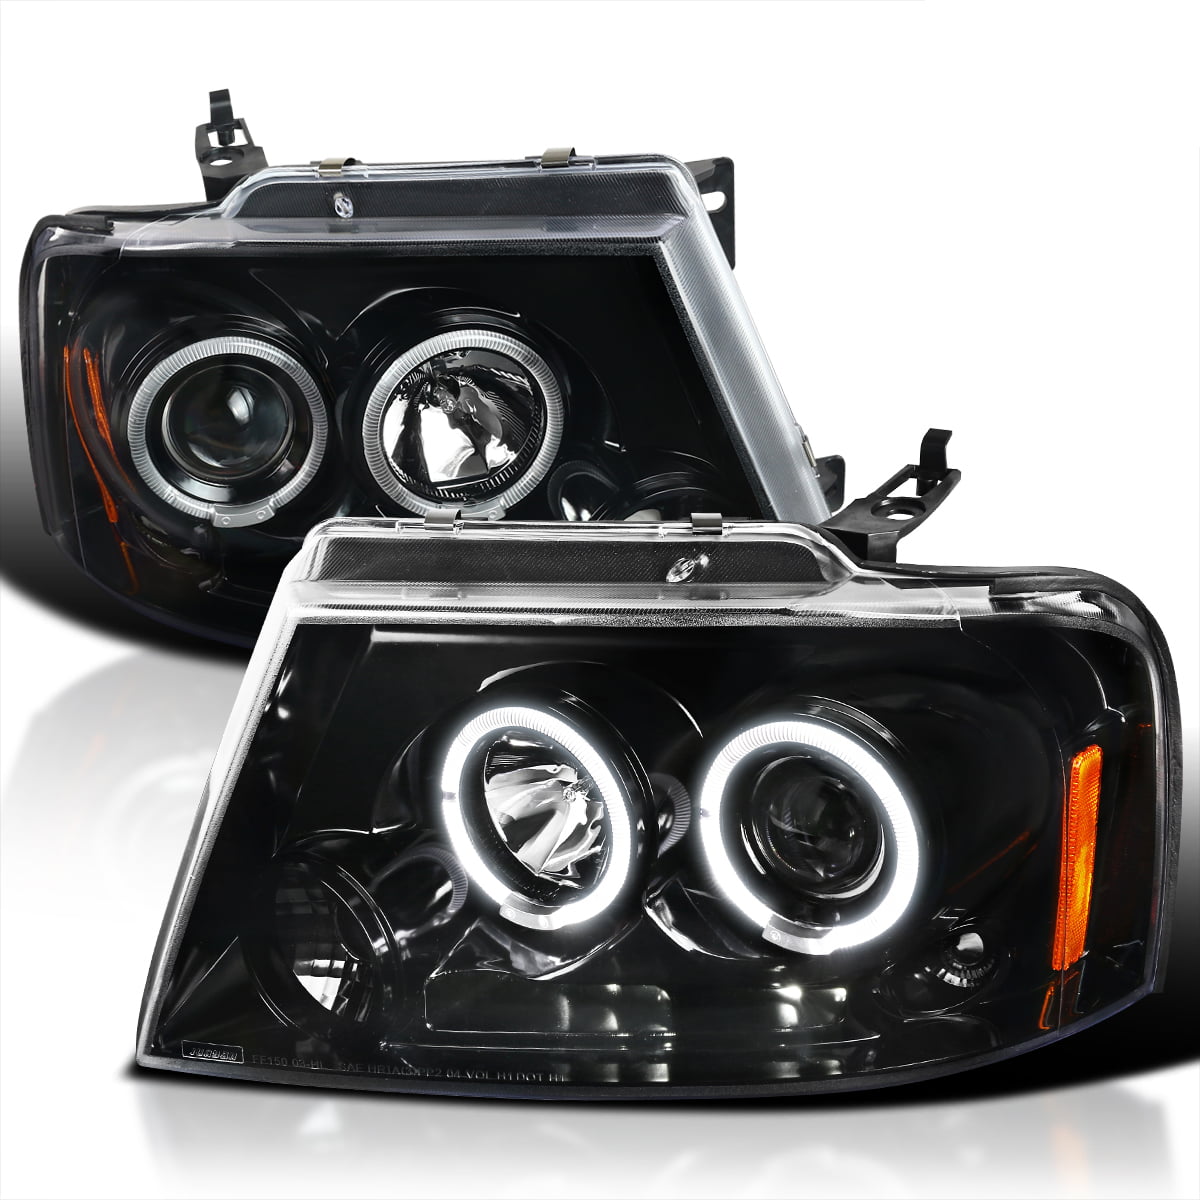 Driver and Passenger Side LED DRL Halogen Headlight Compatible with Ford F-150 Lincoln Mark LT 04-08 Black Housing Clear Corner 